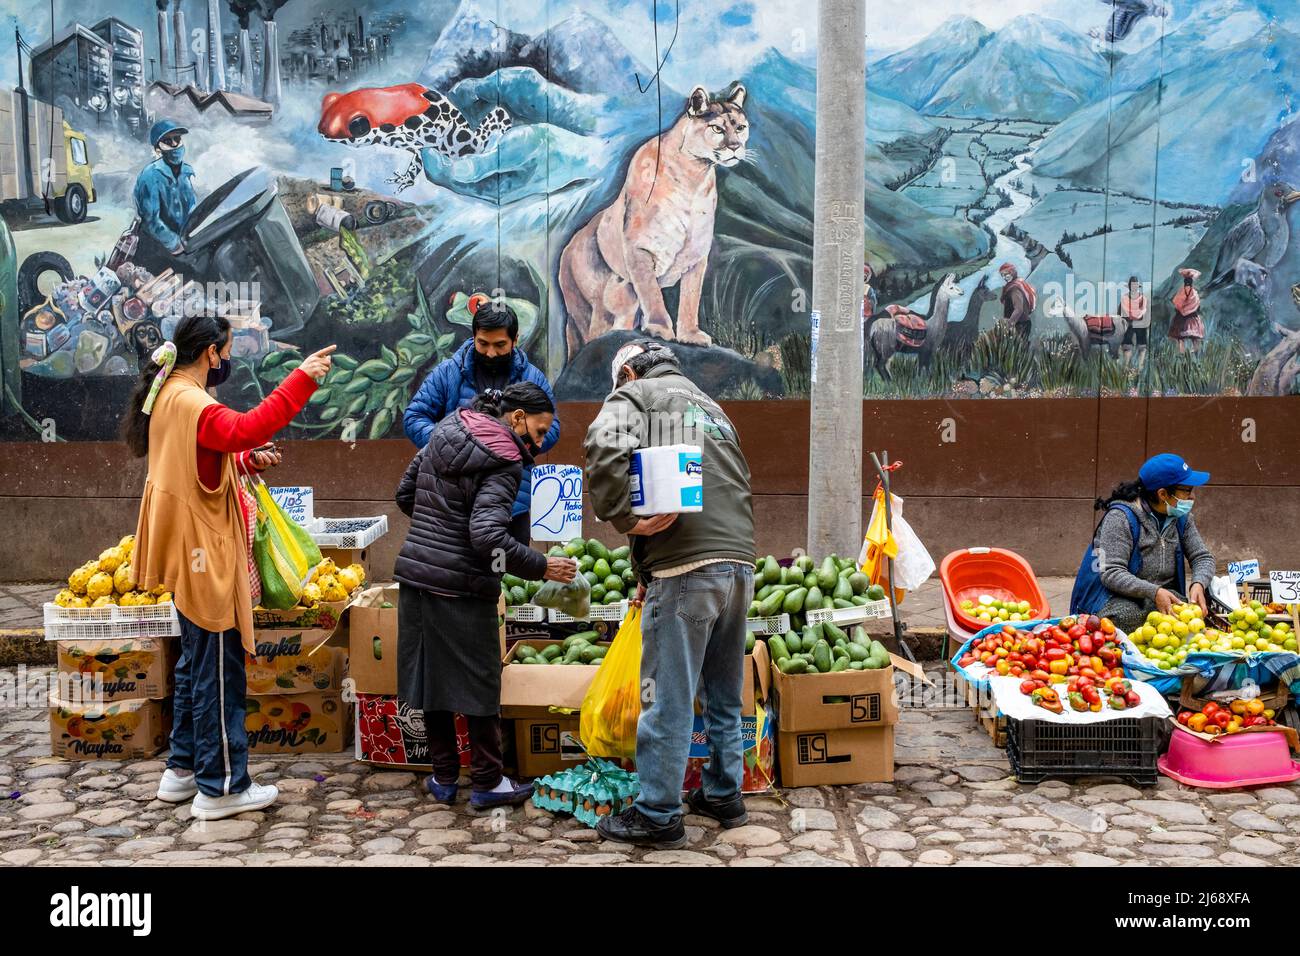 People Food Shopping At An Outdoor Fruit and Vegetable Street Market, Cusco, Cusco Province, Peru. Stock Photo